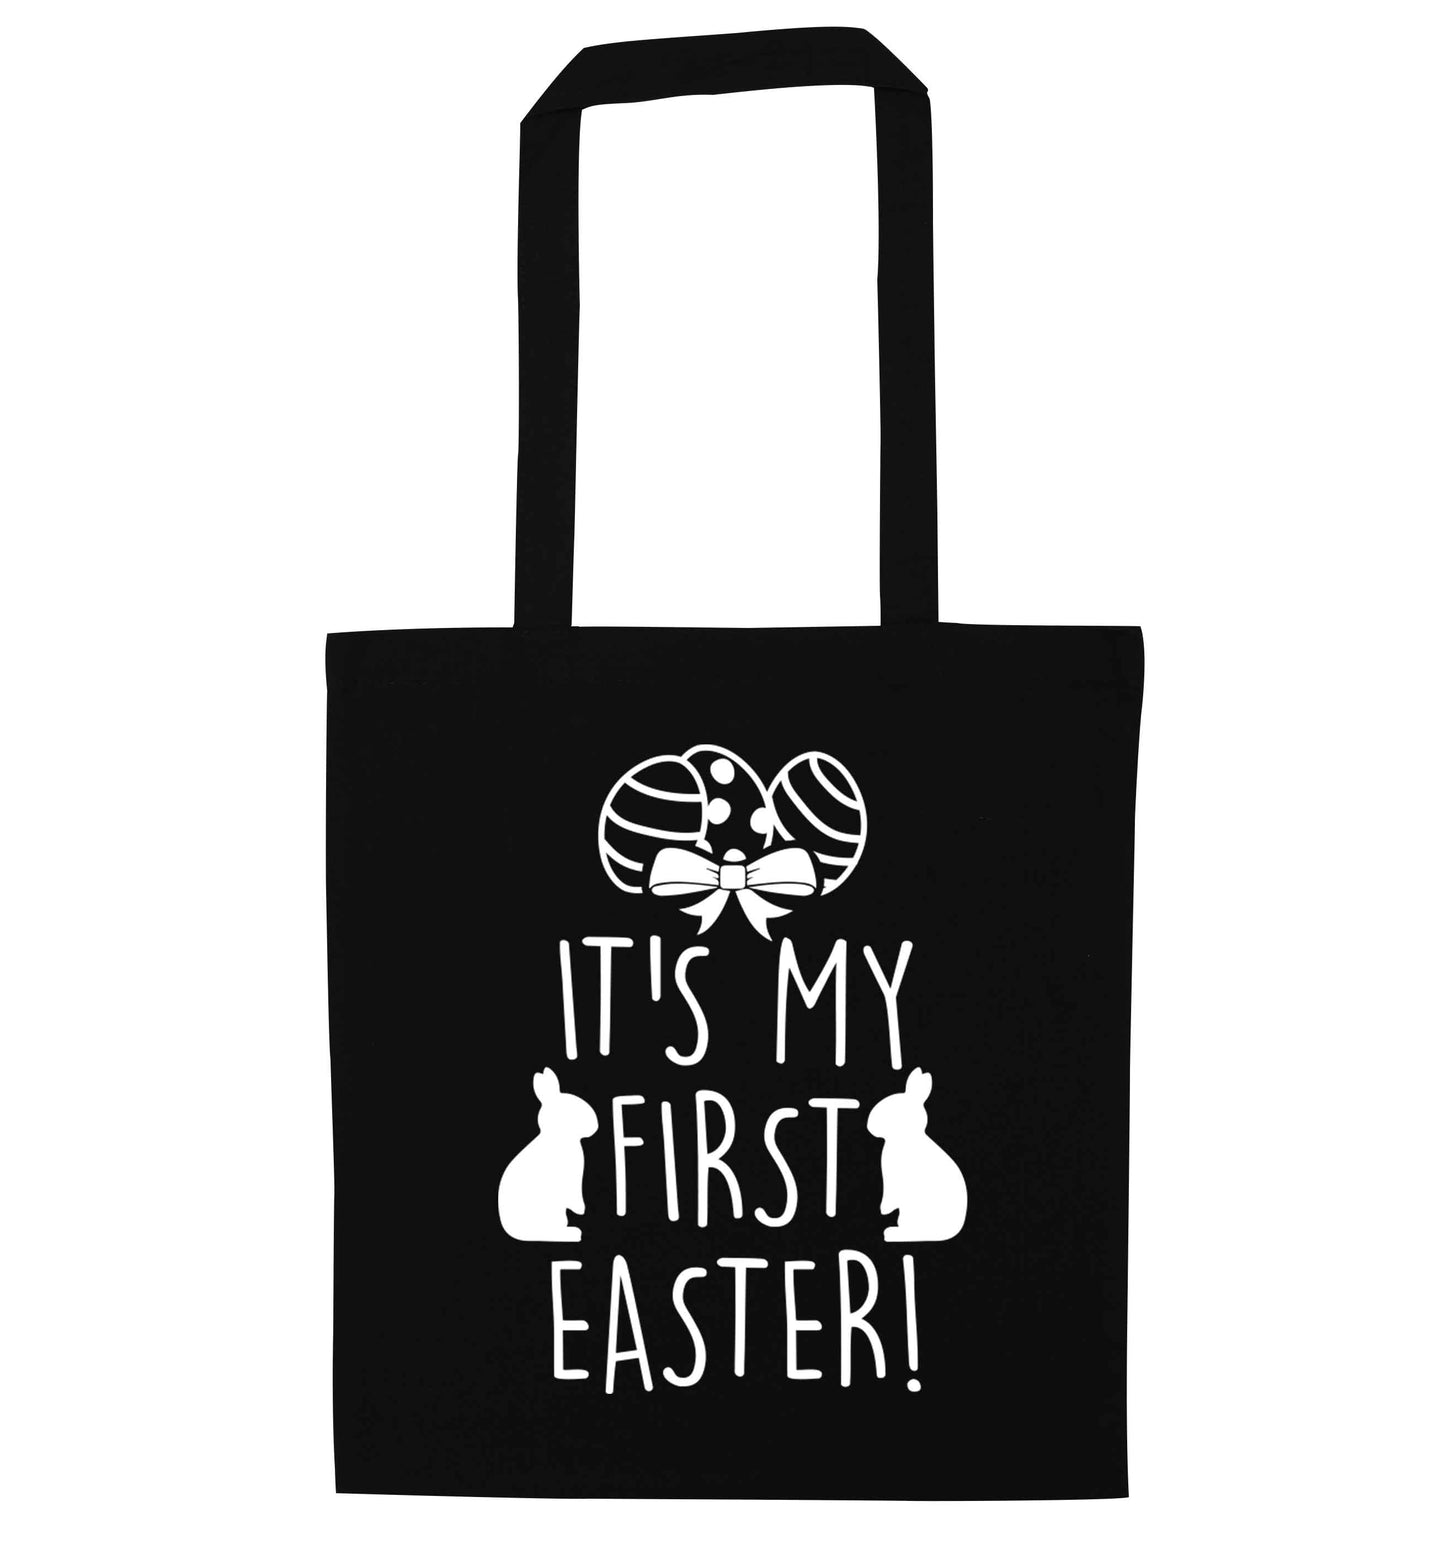 It's my first Easter black tote bag